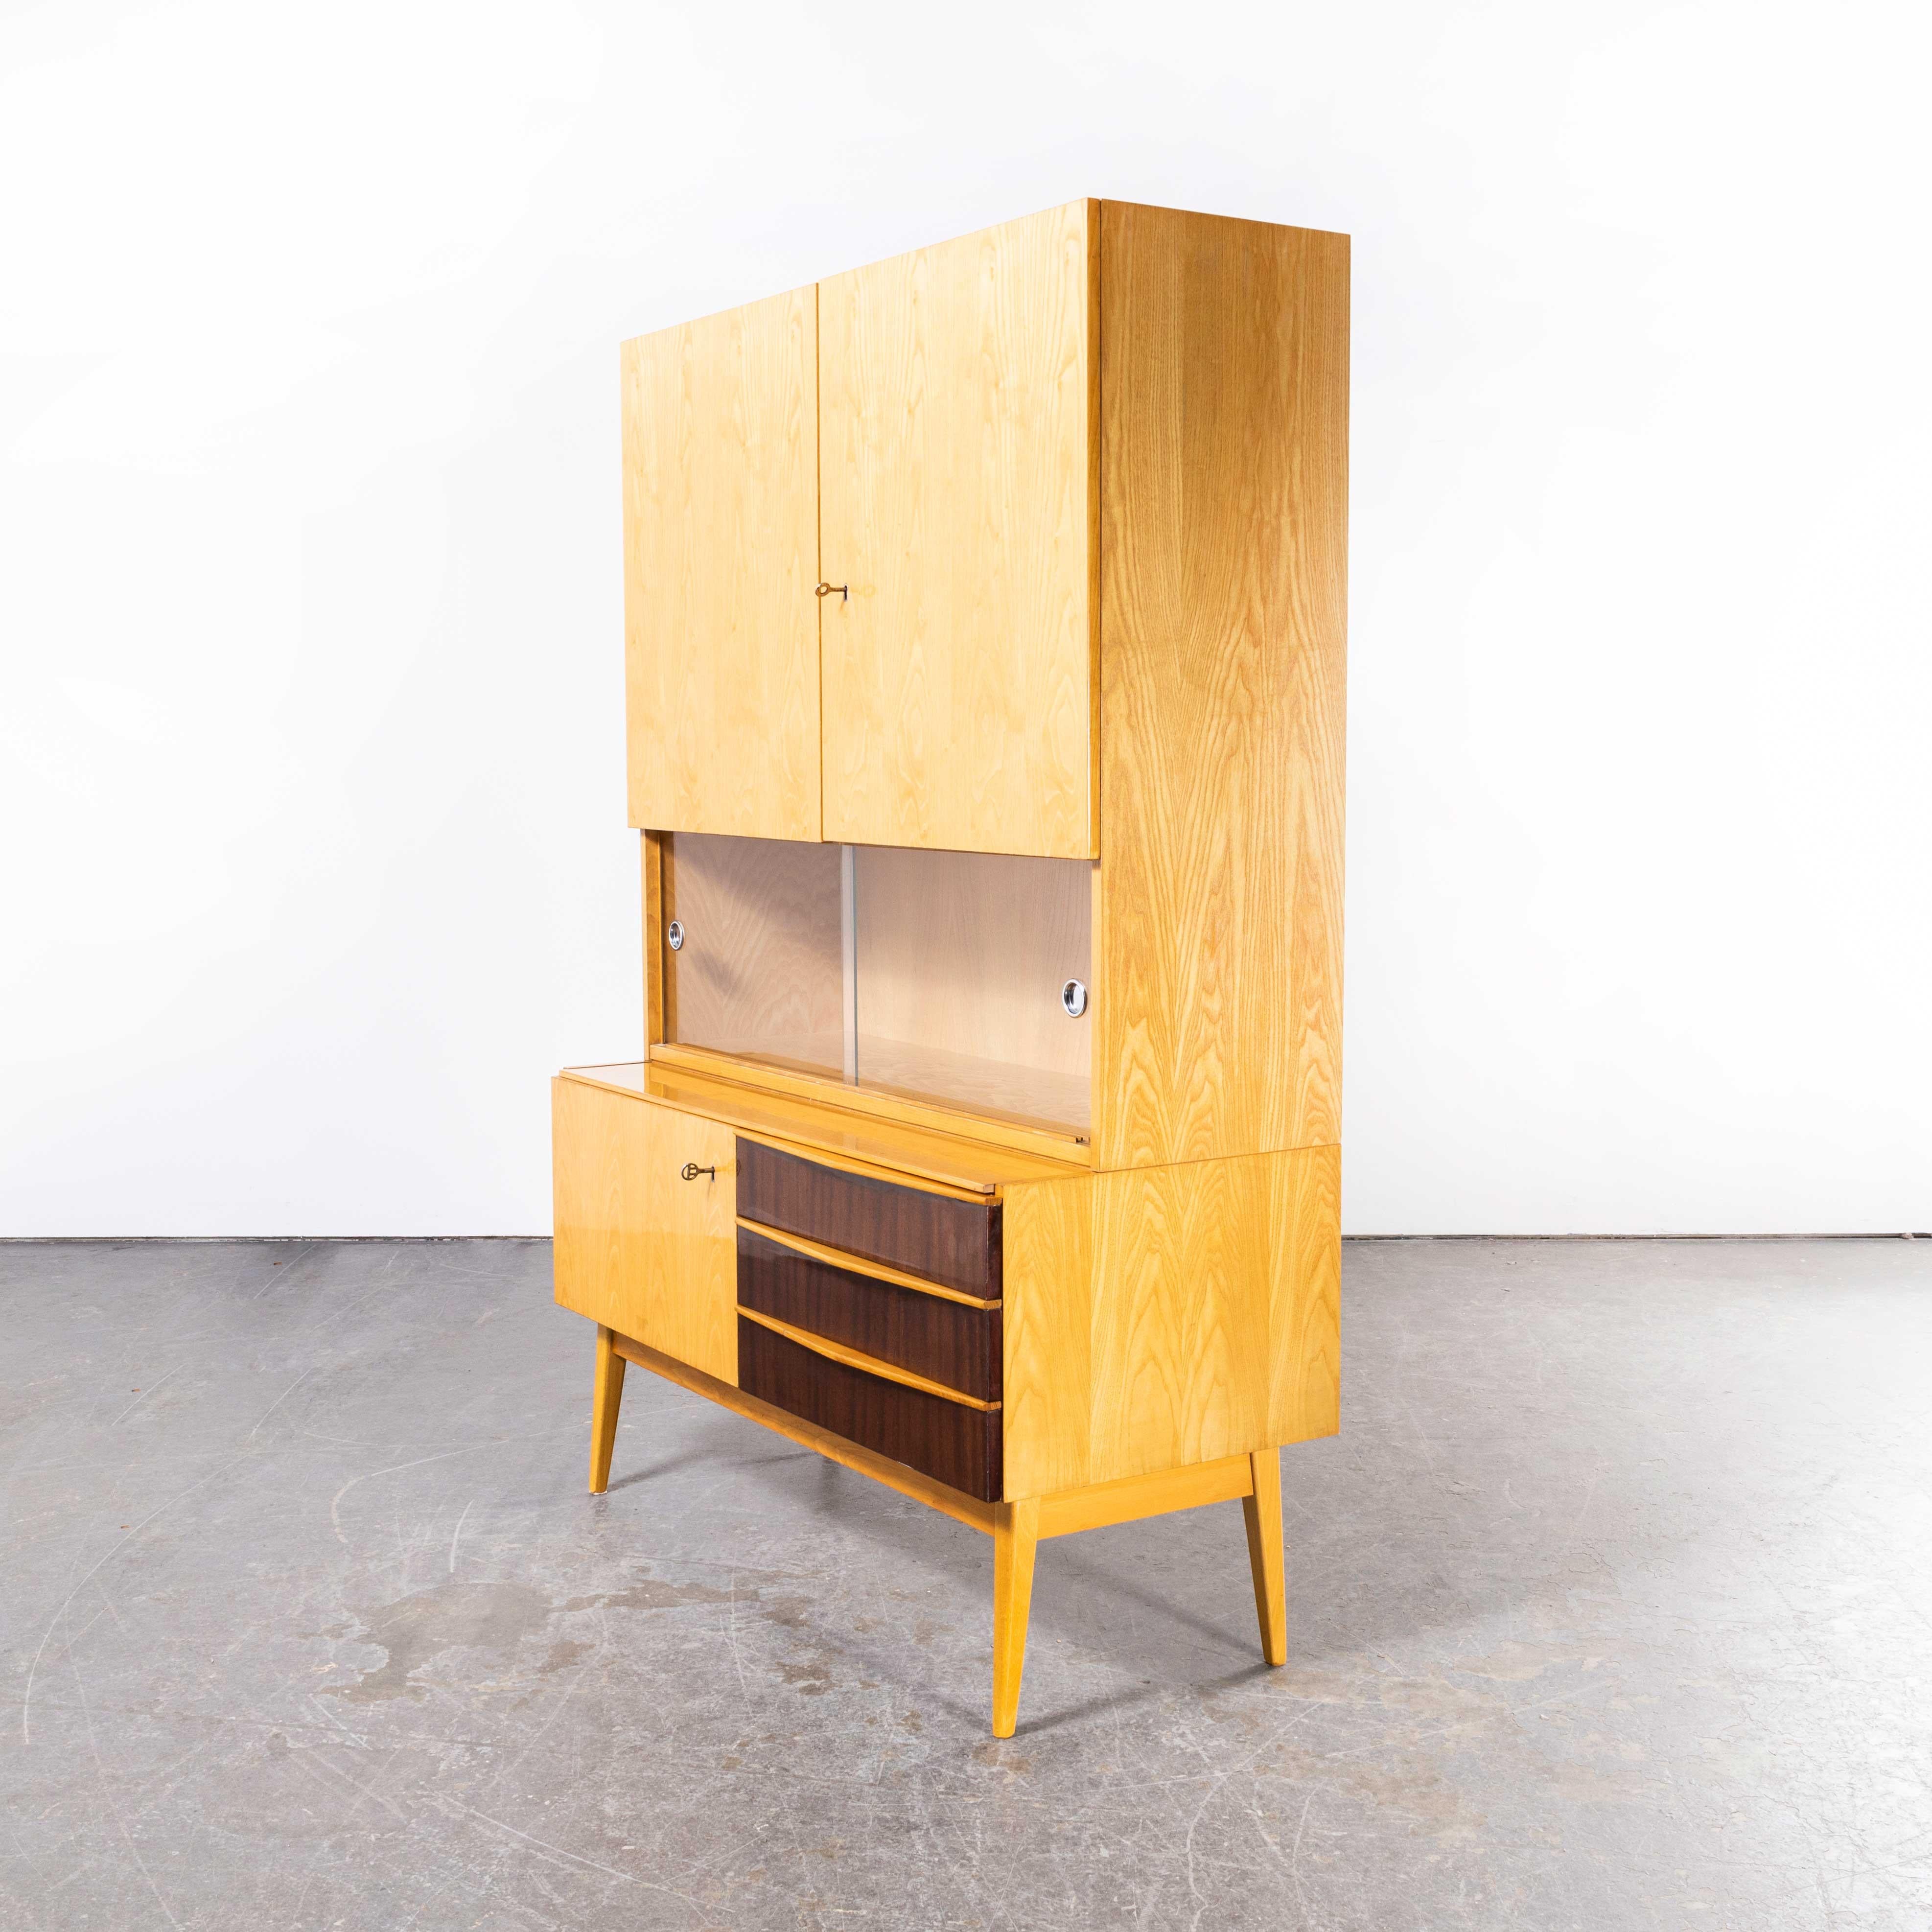 1960’s Four Door Birch Two Tone Cabinet – Nabytek Czech
1960’s Four Door Birch Two Tone Cabinet – Nabytek Czech. Beautiful simple and classic mid century cabinet sourced in the Czech Republic. Produced by Nabytek in Brno in the Czech Republic.